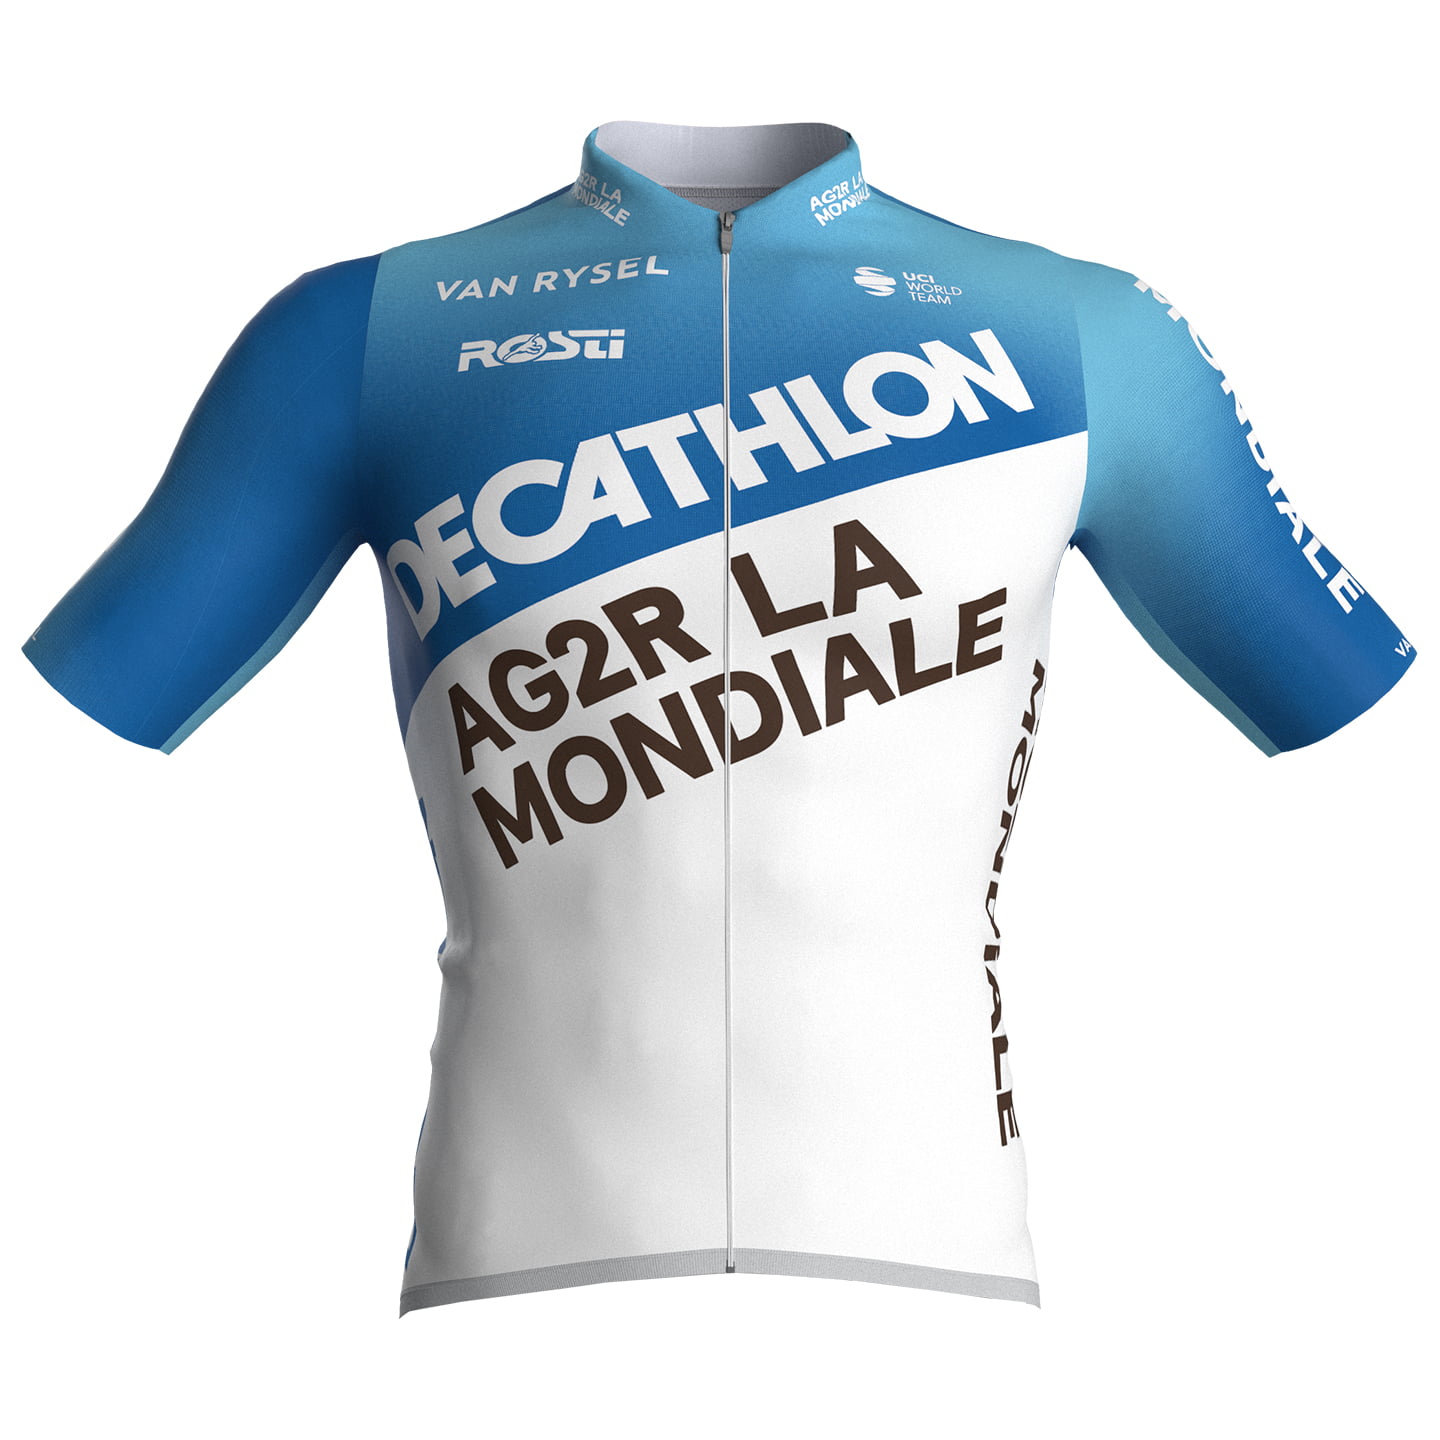 DECATHLON AG2R LA MONDIALE Race 2024 Short Sleeve Jersey Short Sleeve Jersey, for men, size S, Cycling jersey, Cycling clothing